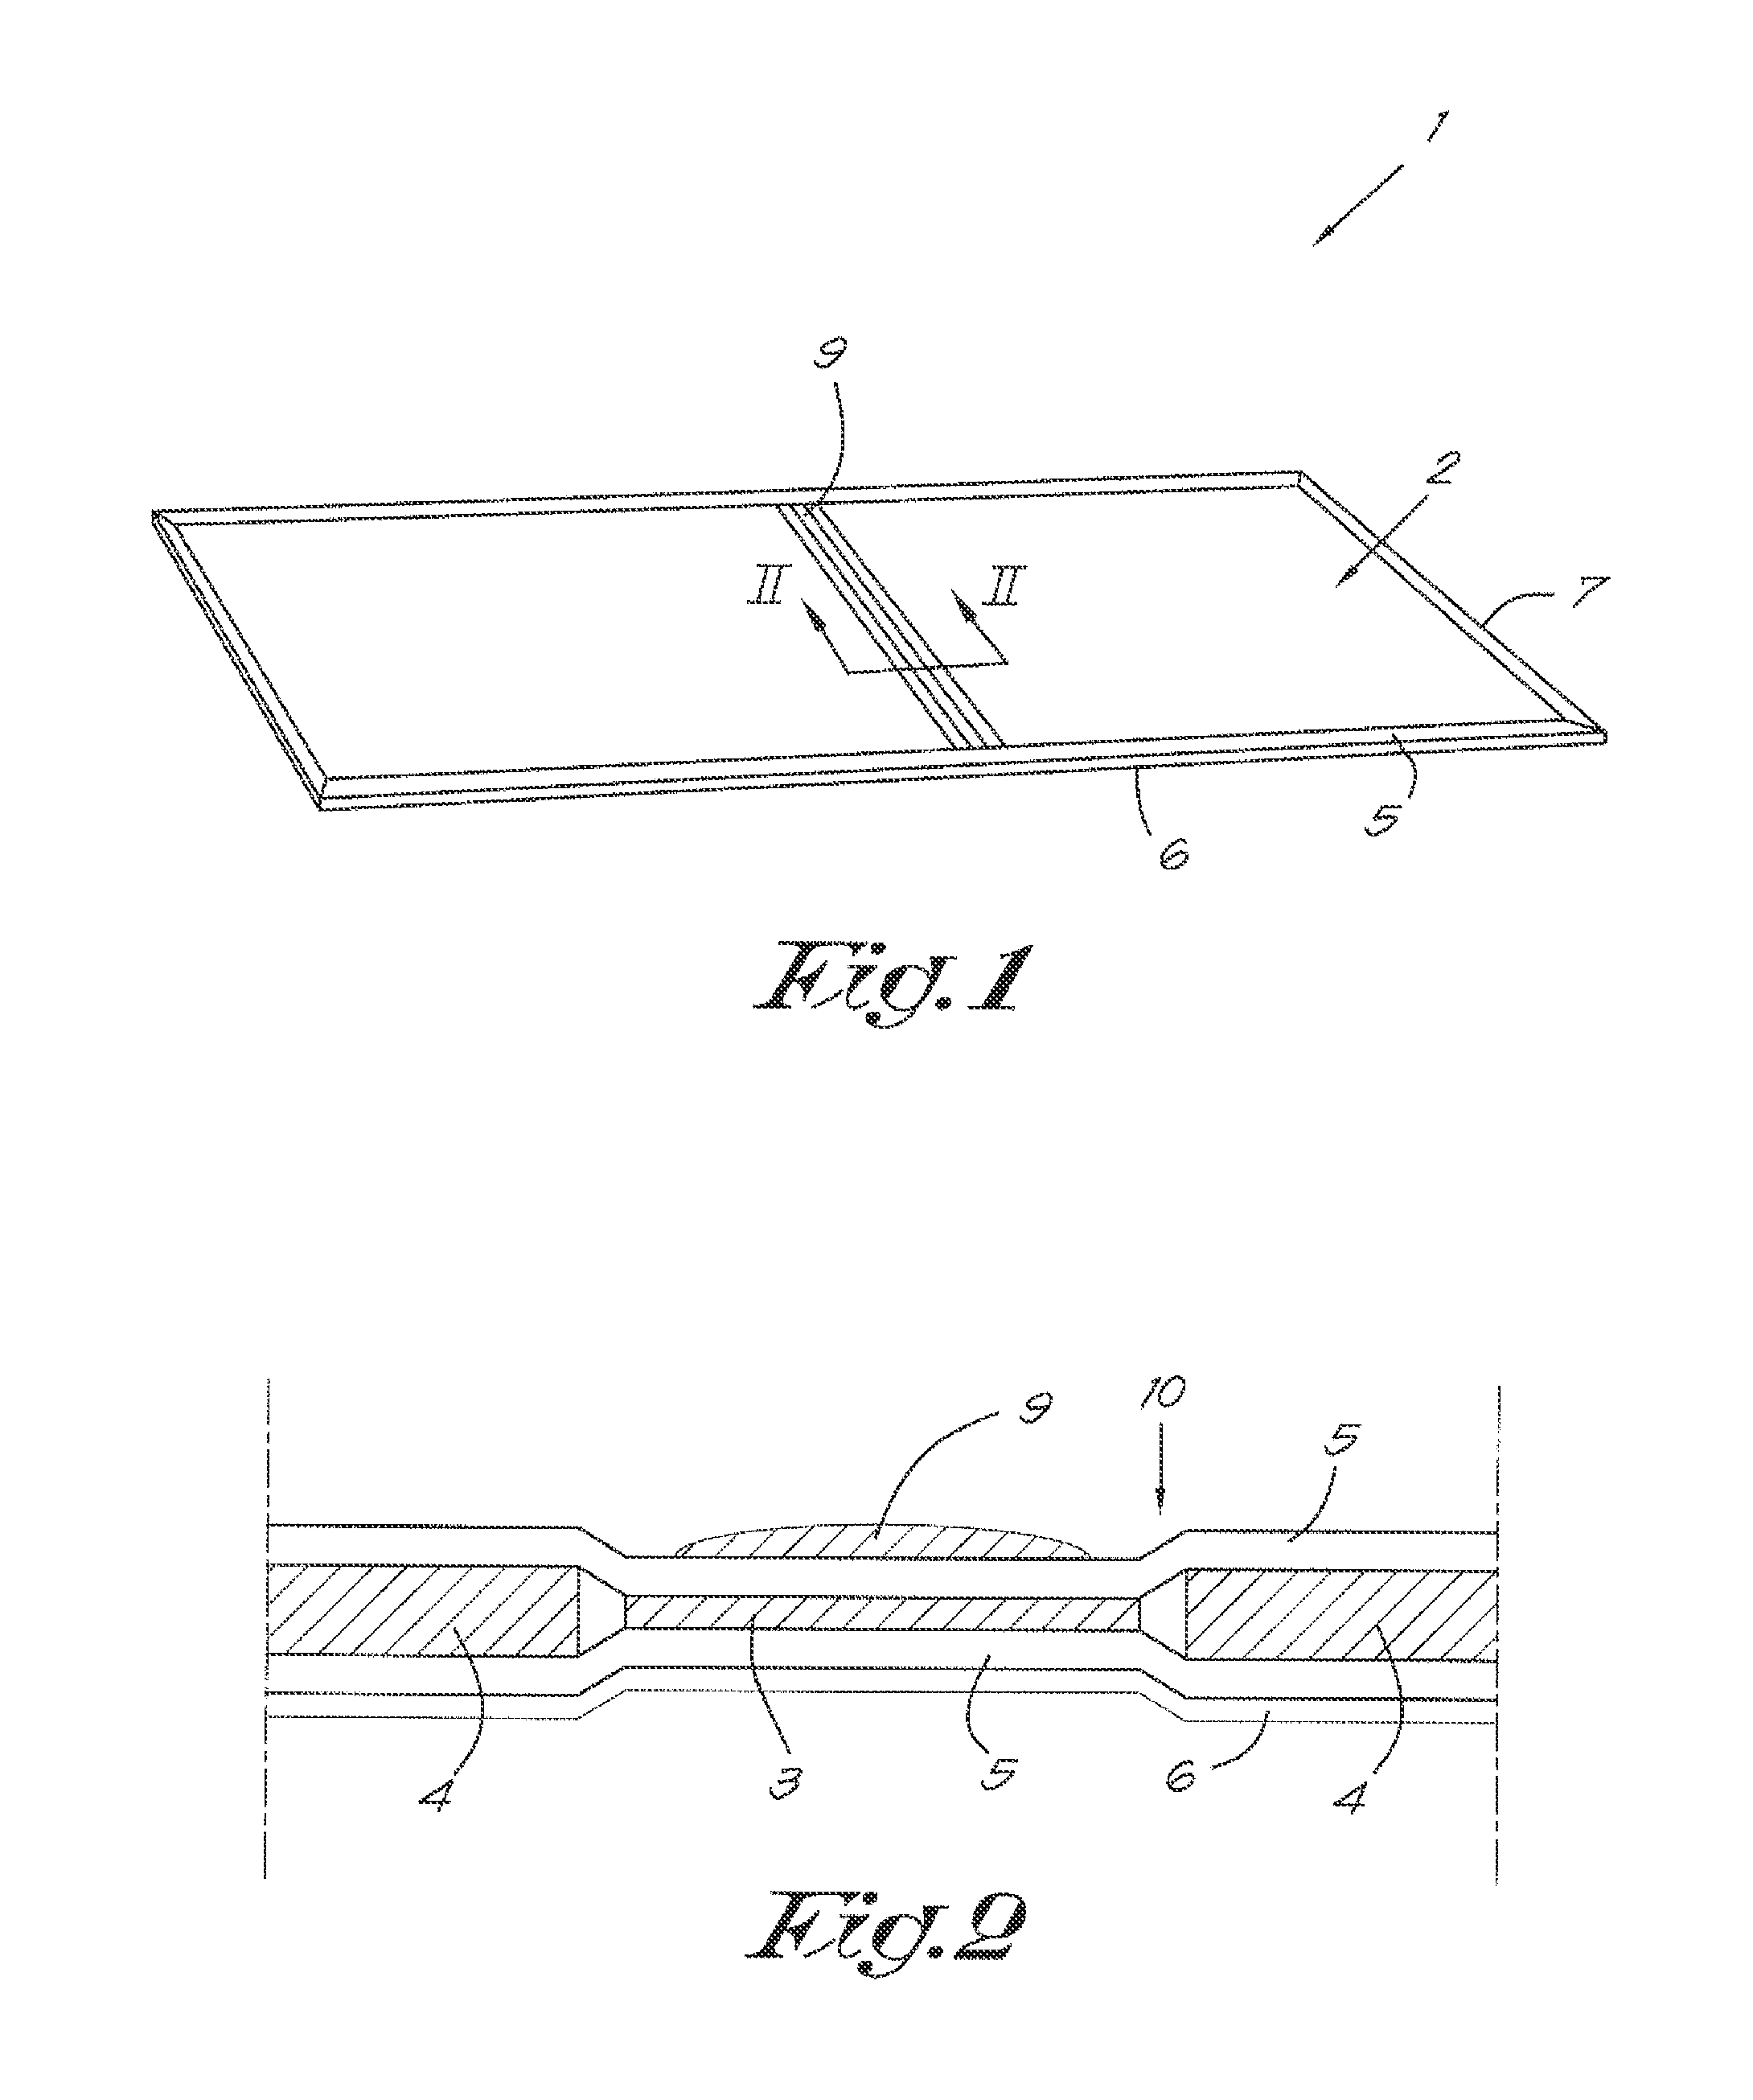 Binding element for manufacturing a binding file and method which makes use of such a binding element for manufacturing the binding file